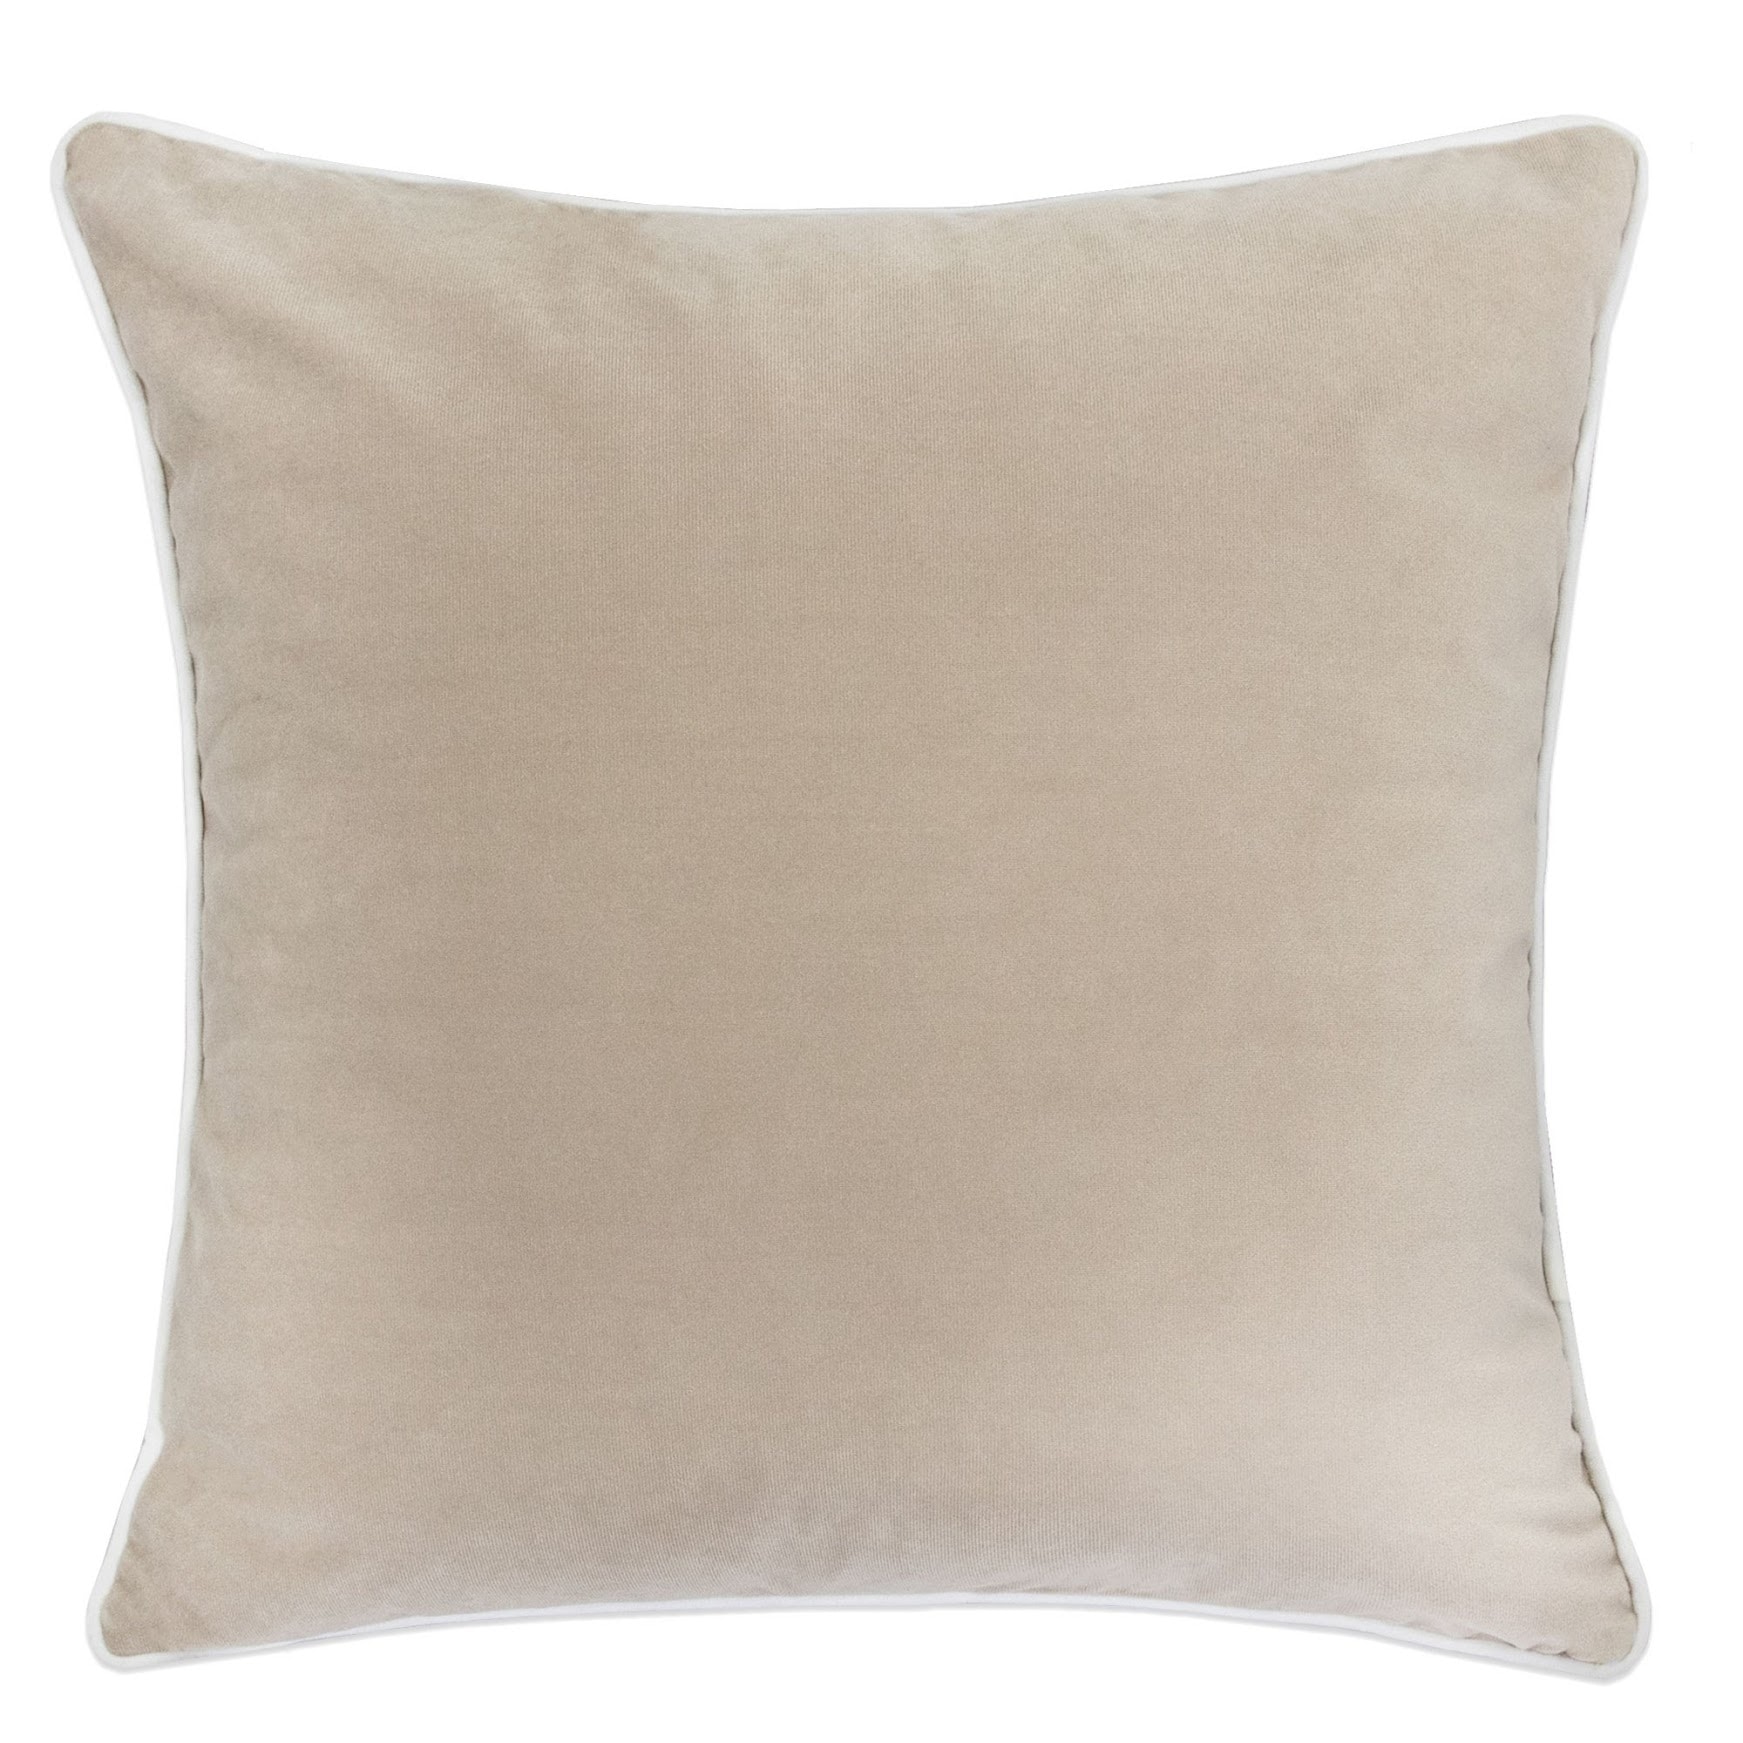 https://ak1.ostkcdn.com/images/products/is/images/direct/de80917cf08fed6d0aed01ef4fe1103db1680cf5/Homey-Cozy-Classical-Velvet-Solid-Throw-Pillow-Cover-%26-Insert.jpg